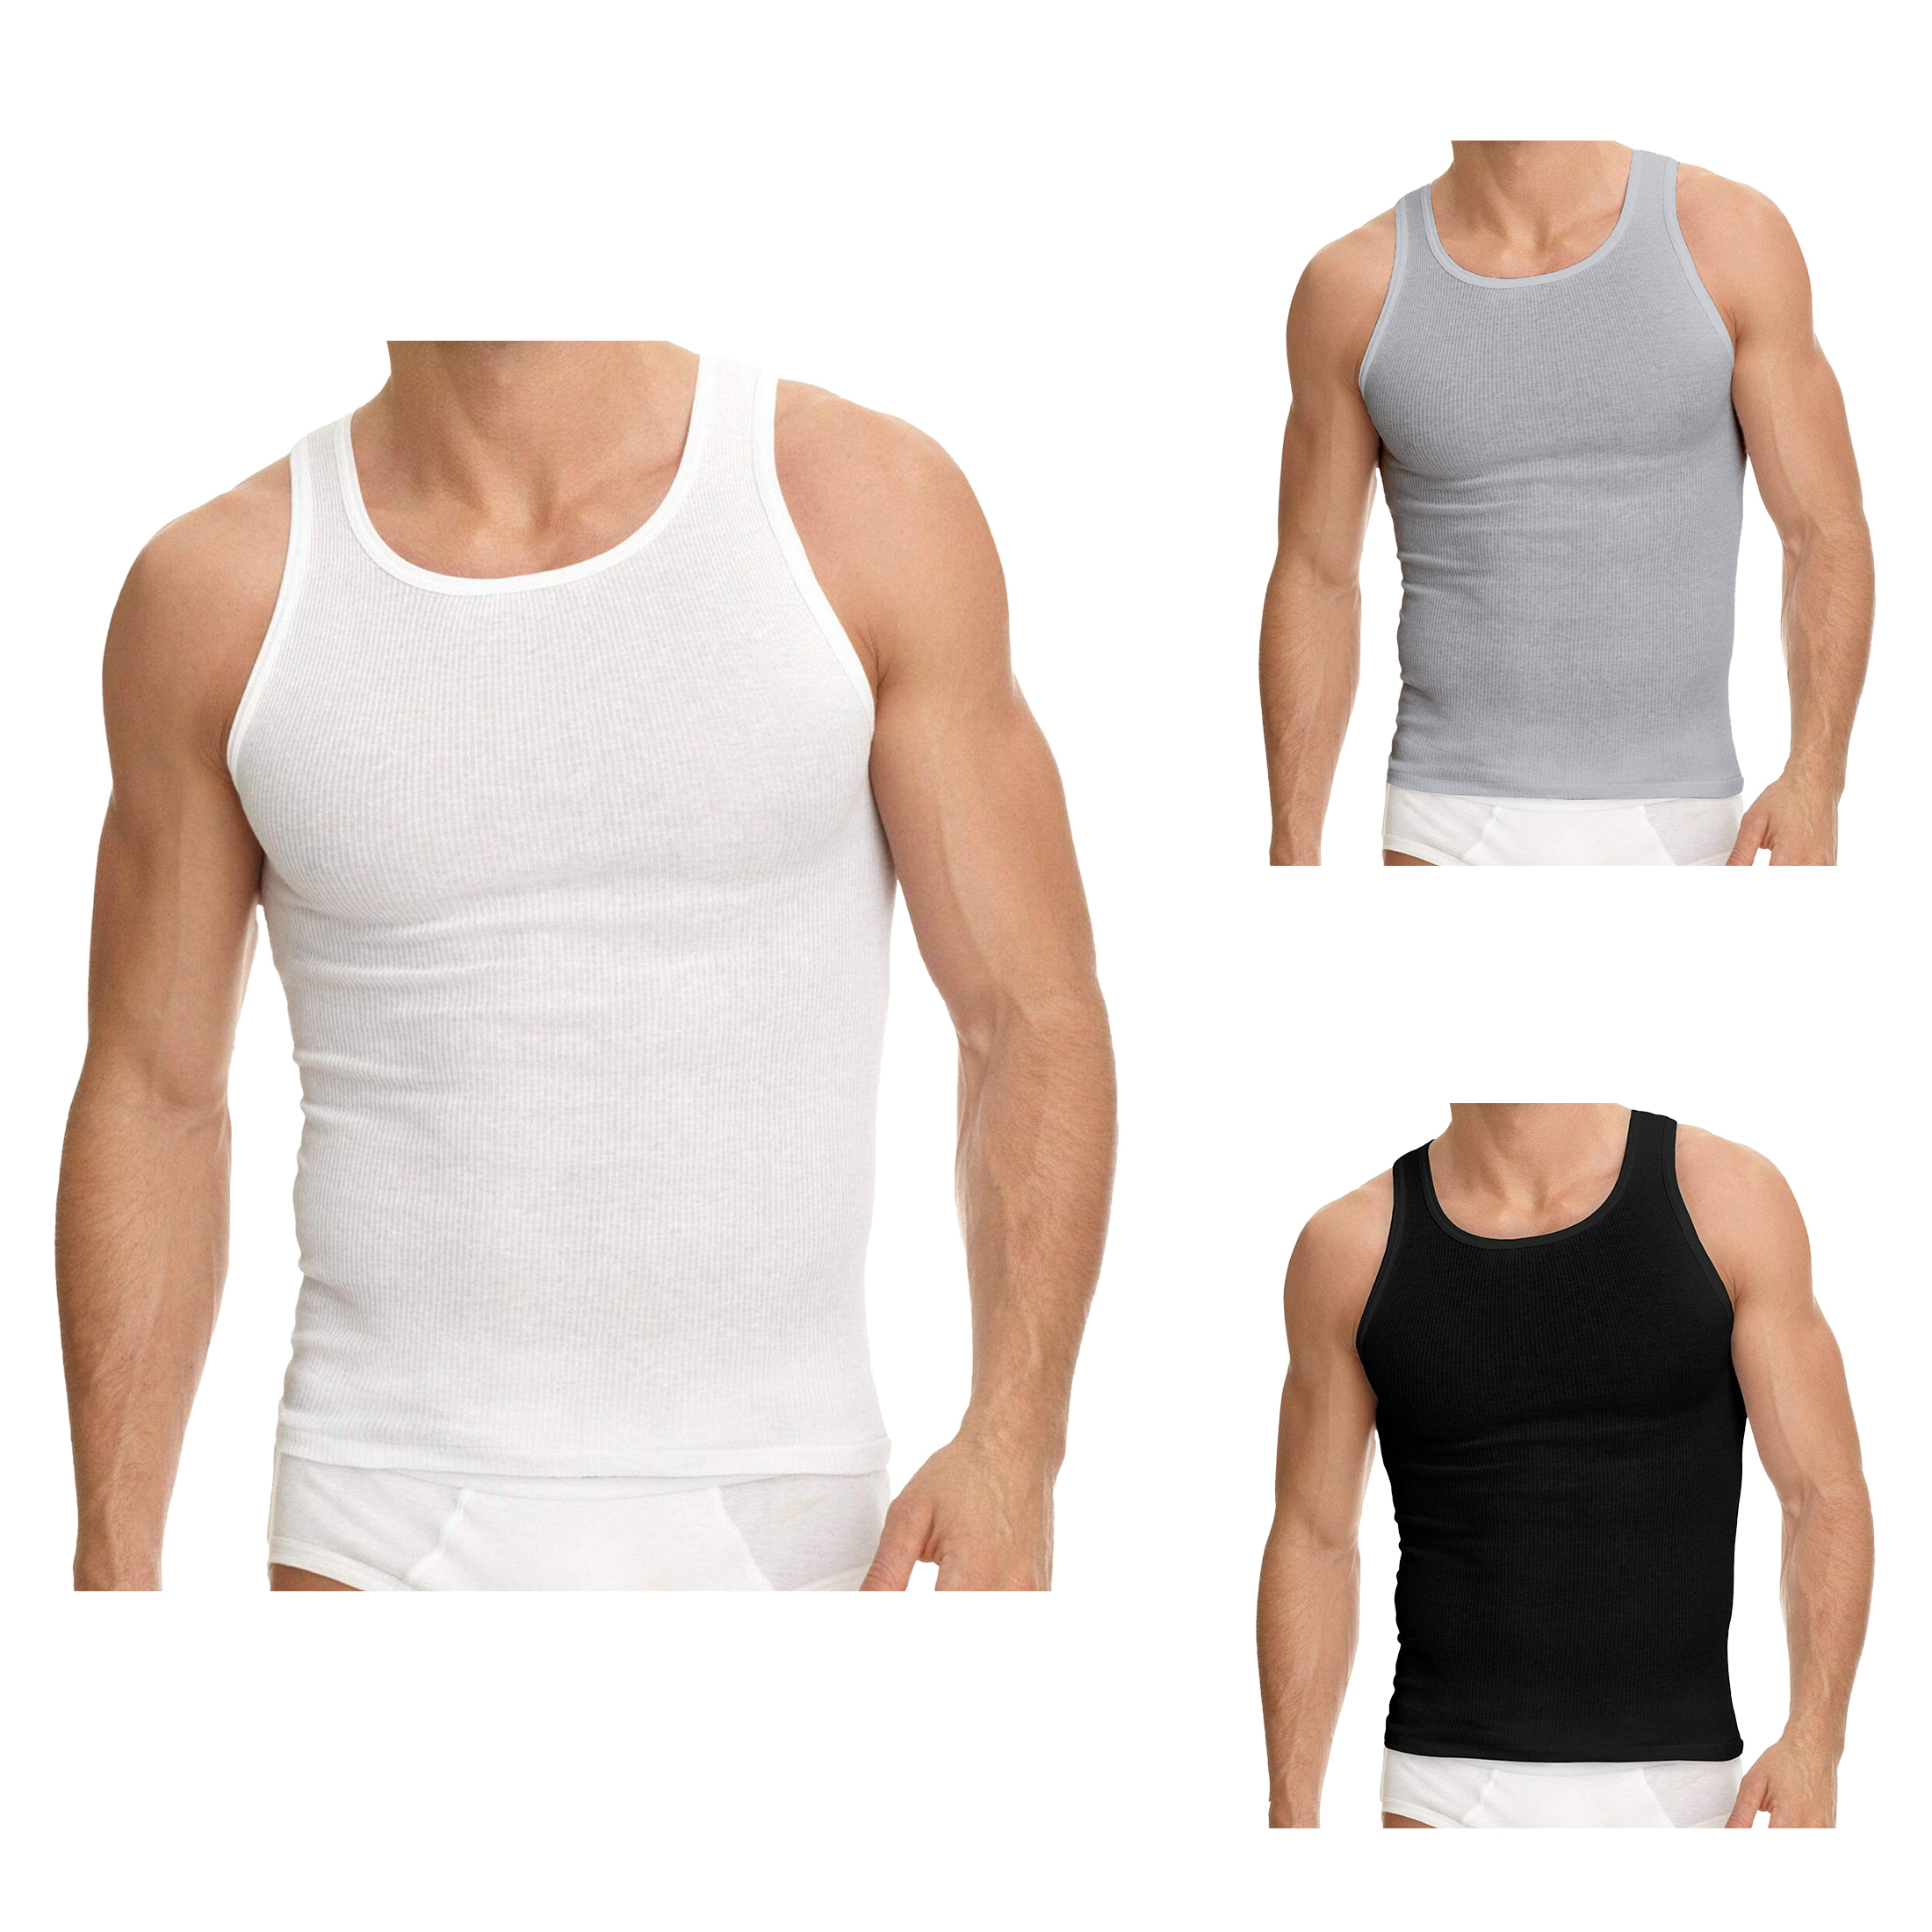 12-Pack: Men's Solid Cotton Soft Ribbed Slim-Fitting Summer Tank Tops - White, Small